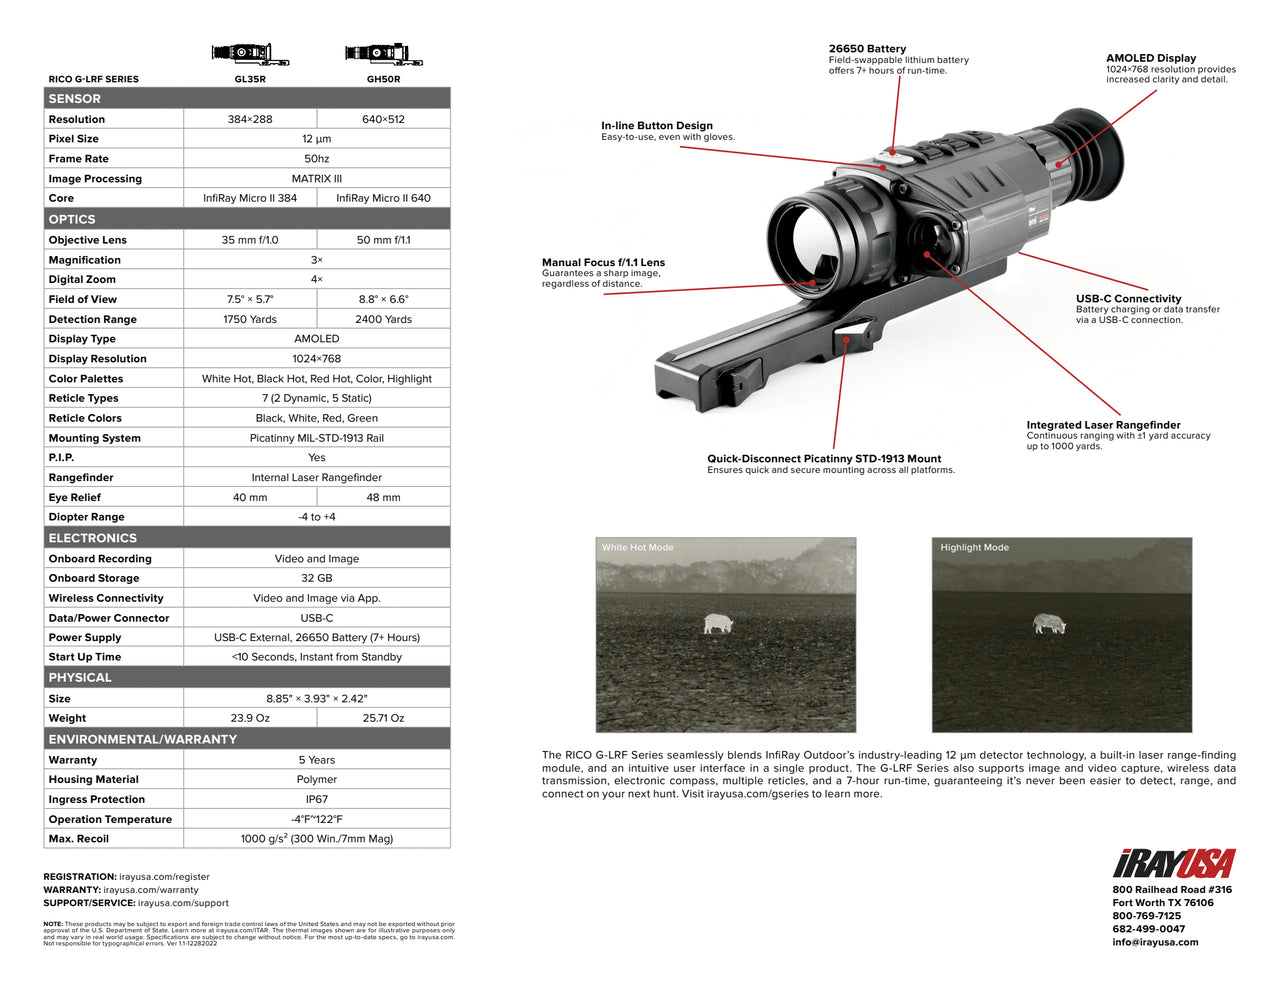 RICO G-LRF 640 3X 50mm Thermal Weapon Sight GH50R